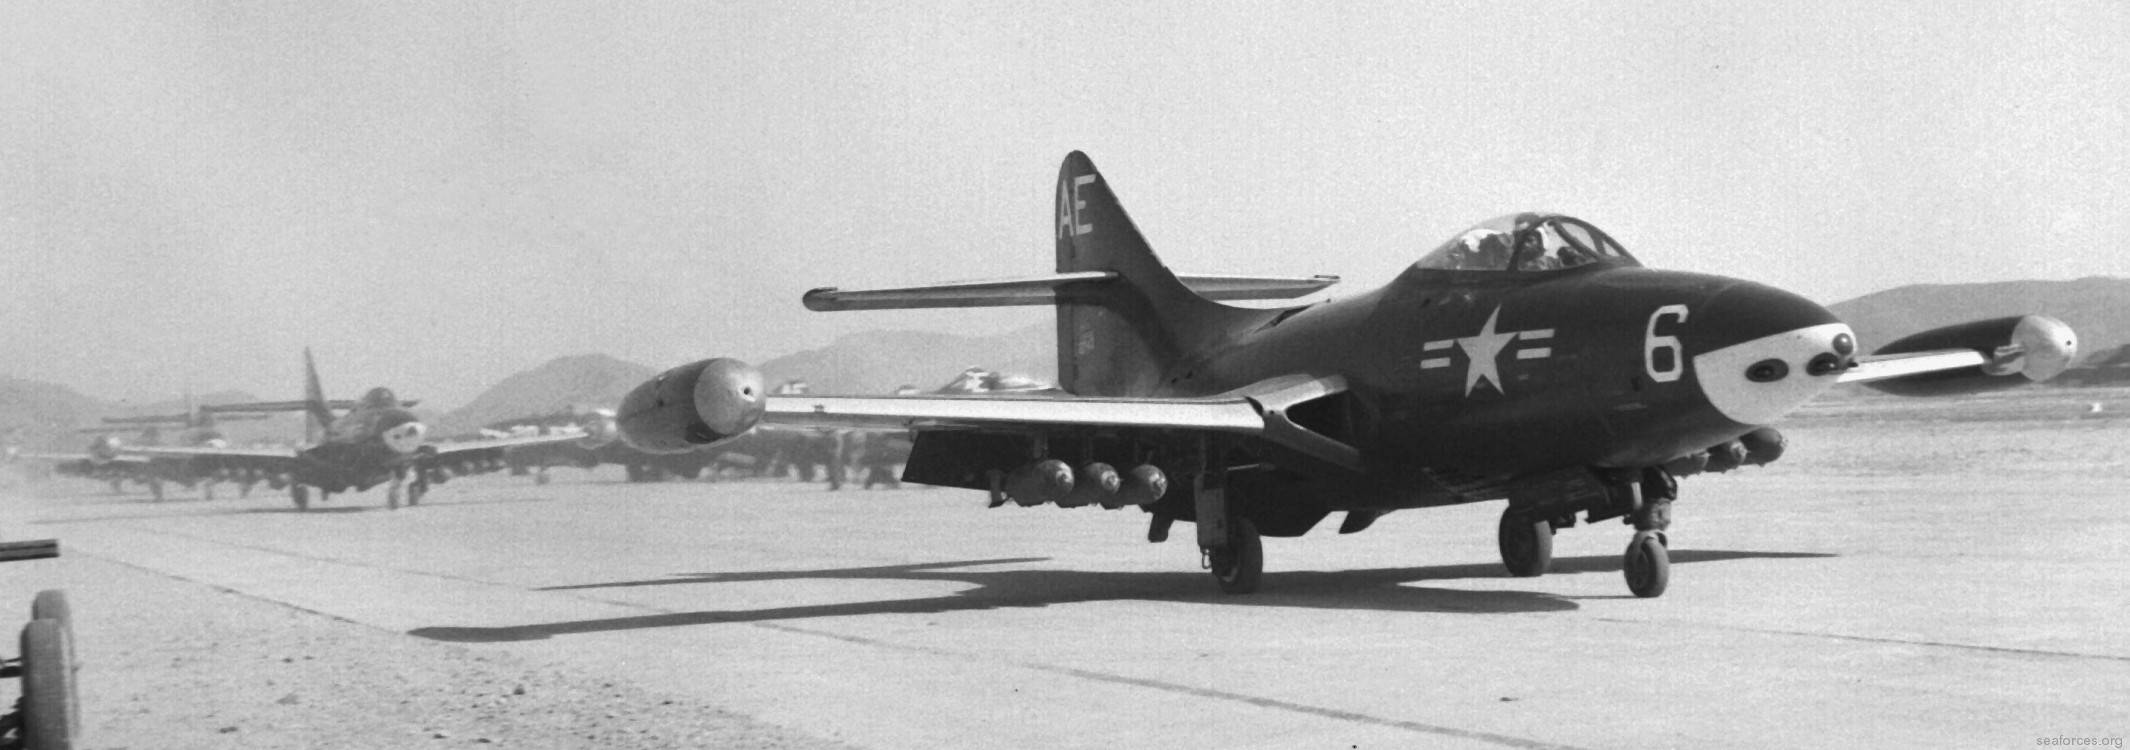 vmf-115 marine fighter squadron f9f-2 panther pohang korea 87